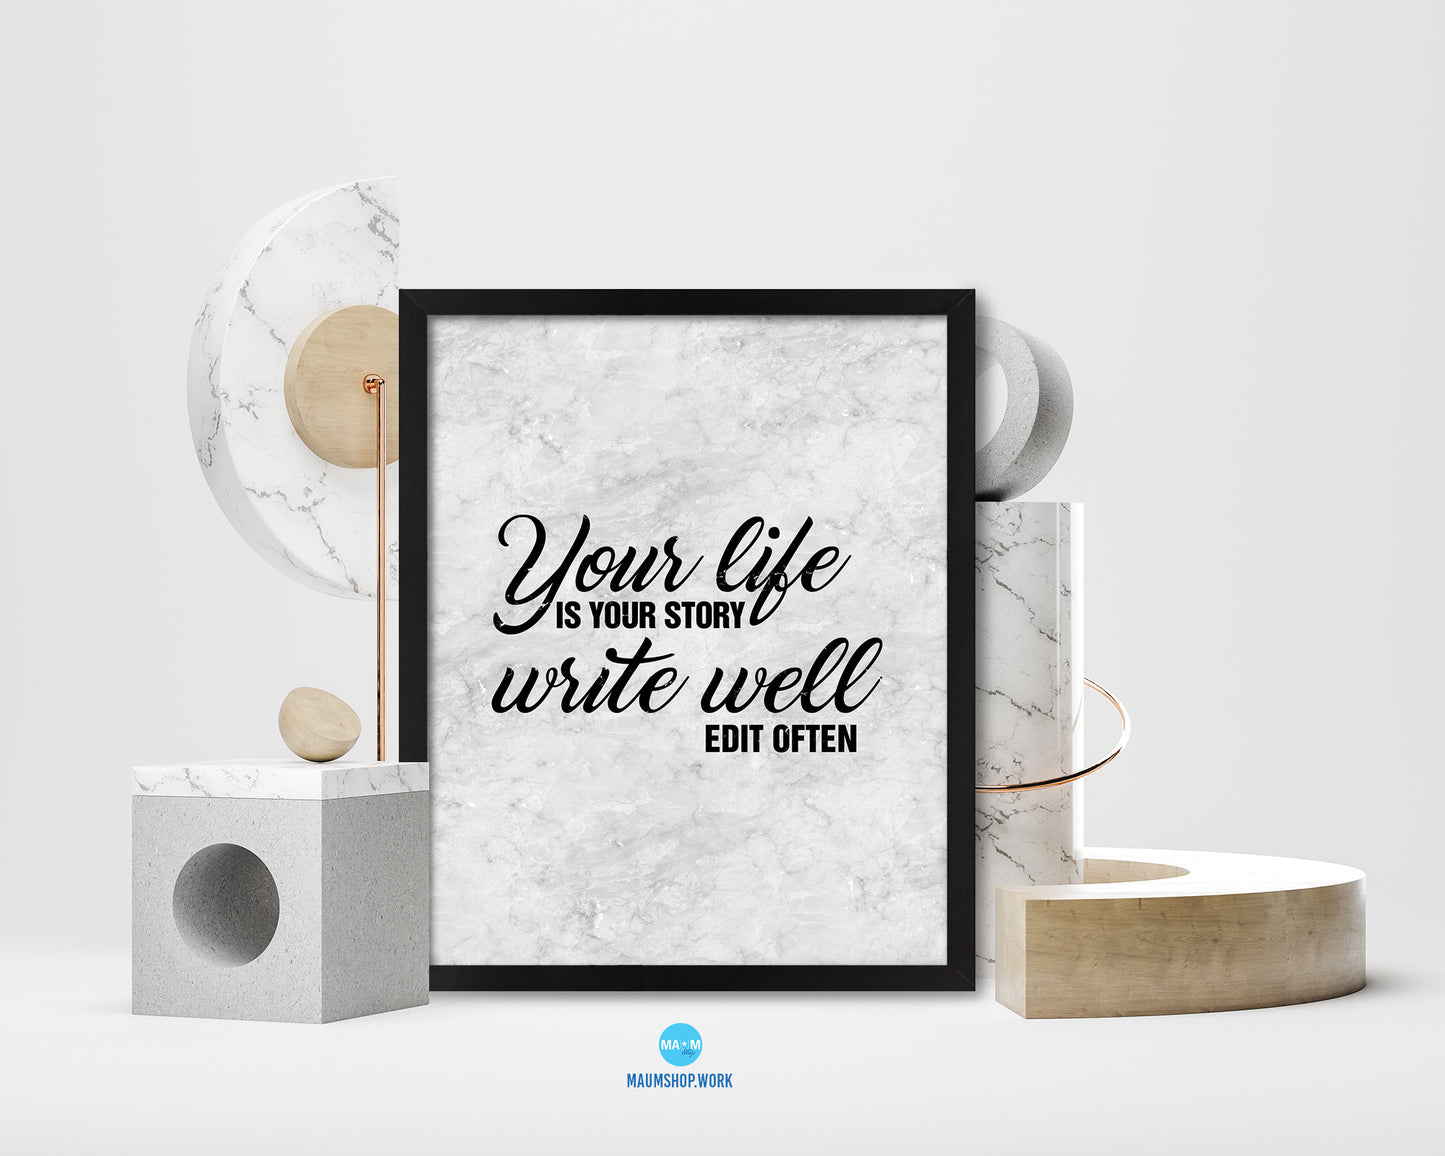 Your life is your story write well edit often Quote Framed Print Wall Art Decor Gifts